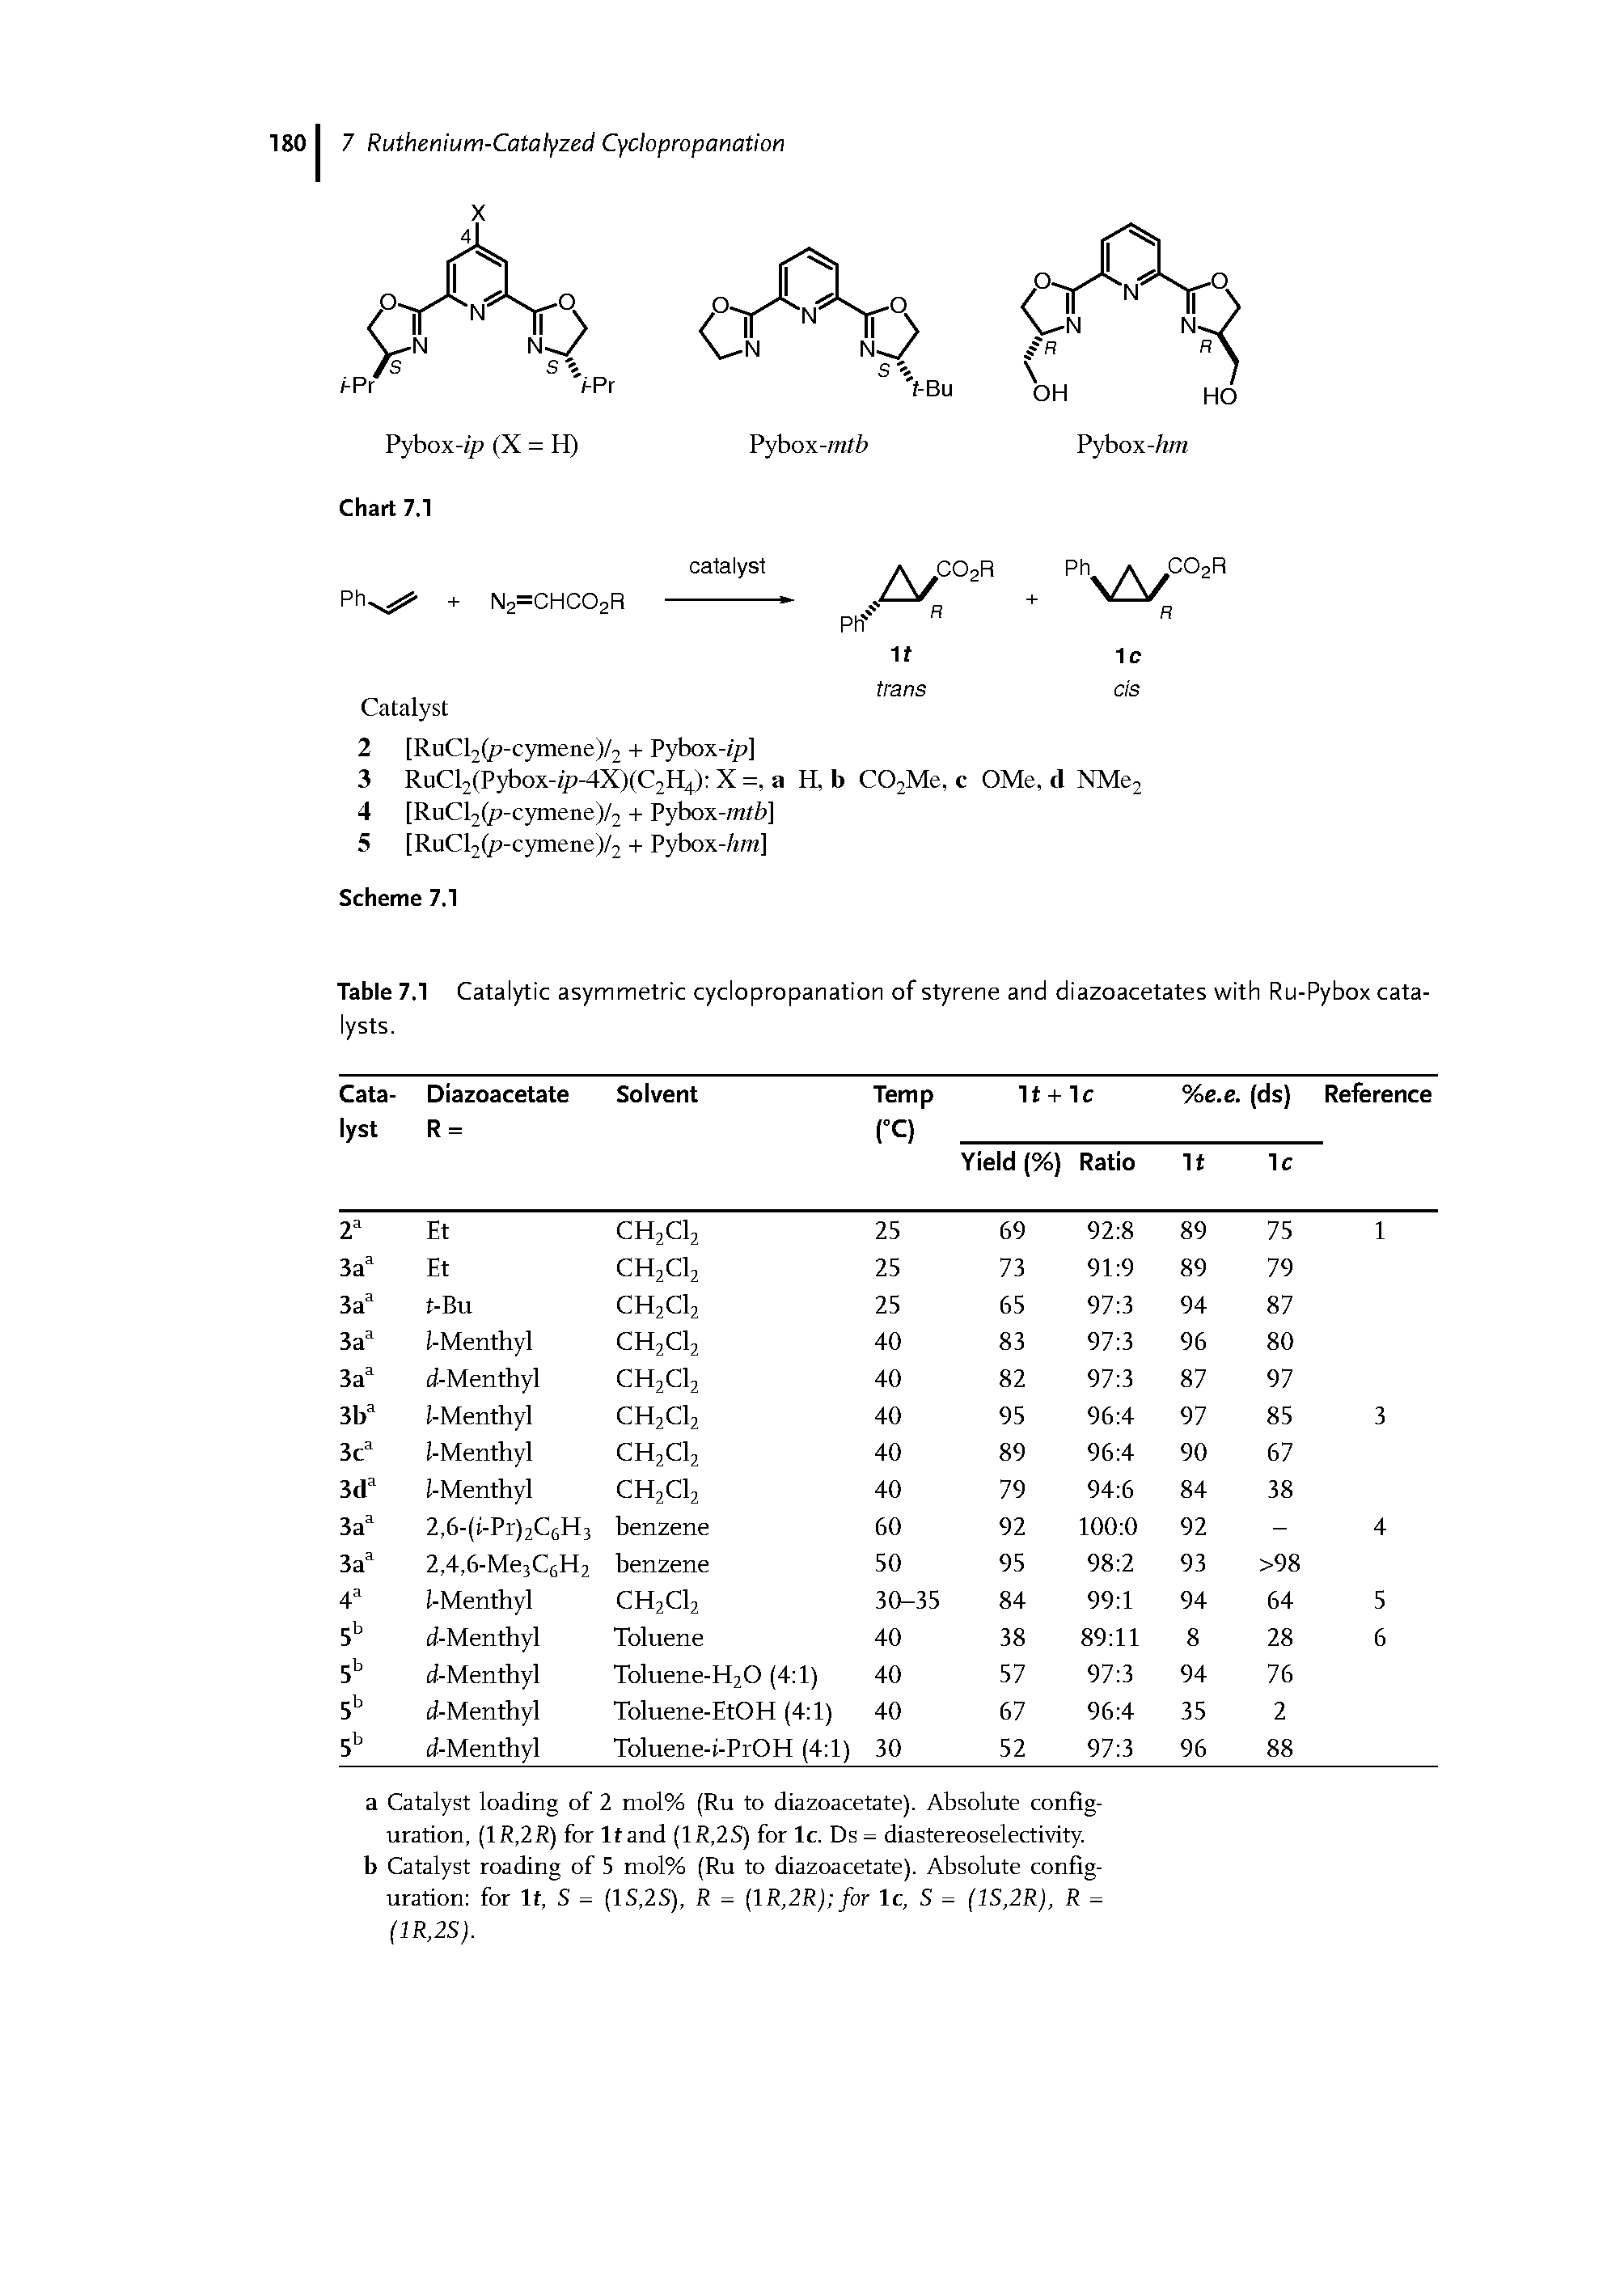 Table 7.1 Catalytic asymmetric cyclopropanation of styrene and diazoacetates with Ru-Pybox catalysts.